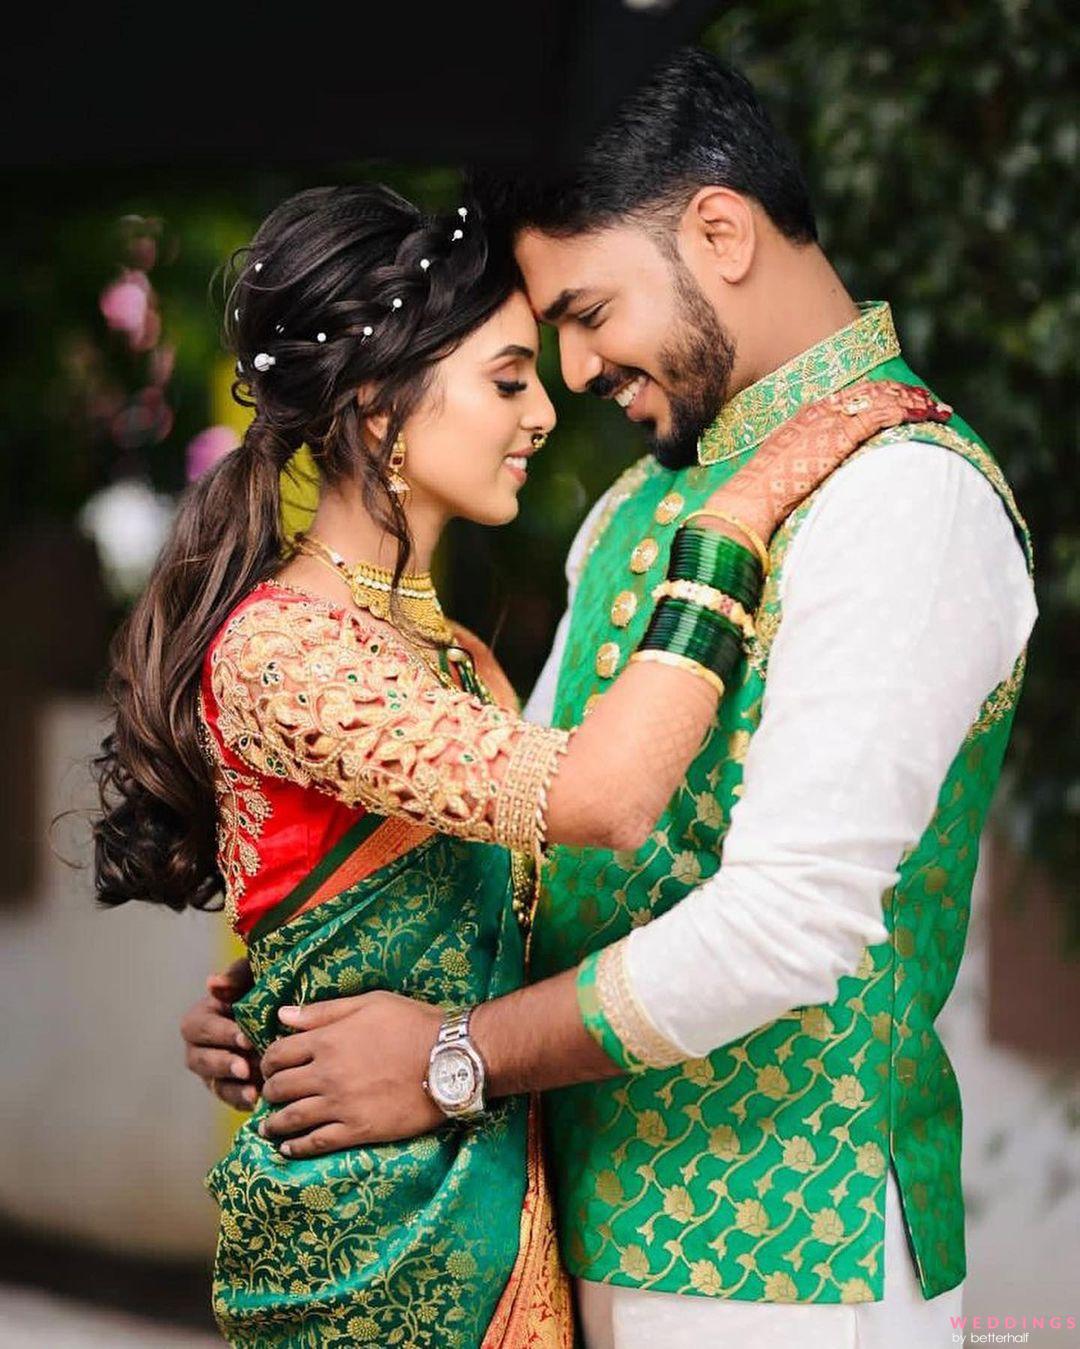 Top 6 Wedding Ideas For Your Bridal Look From These Stunning Marathi Brides  ! - Witty Vows | Couple wedding dress, Wedding couple poses, Indian wedding  poses